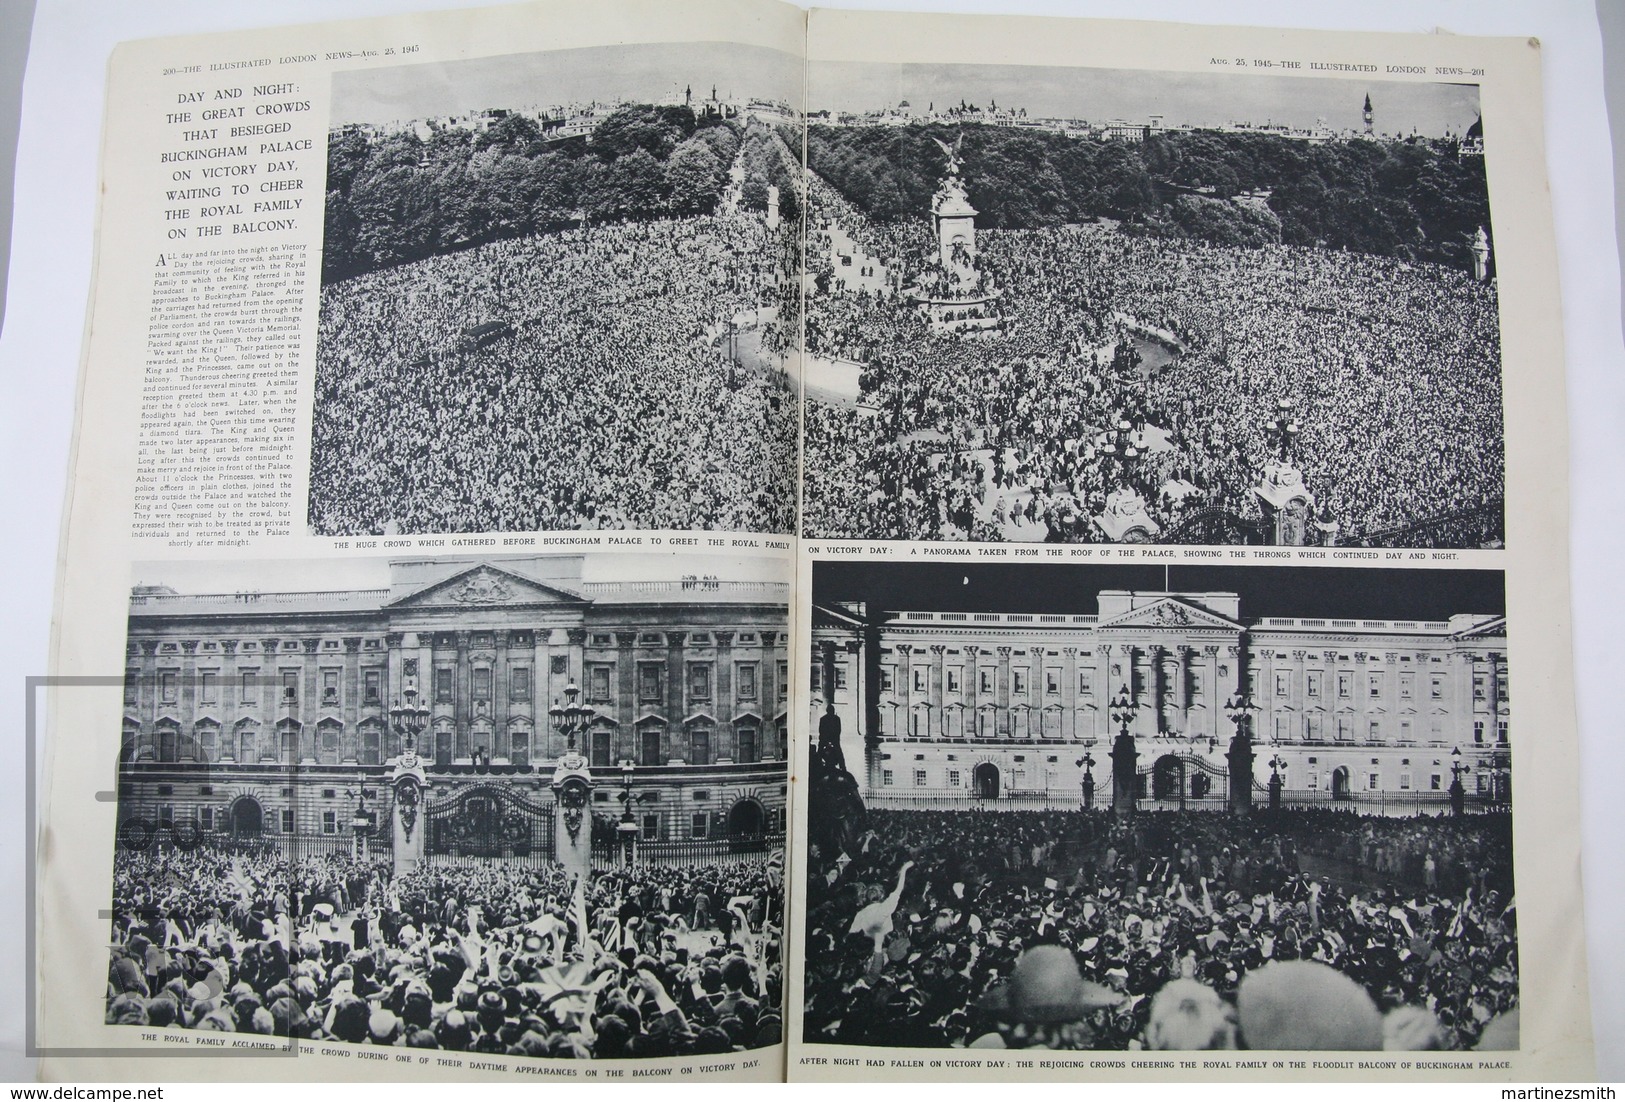 WWII The Illustrated London News, August 25, 1945 - Their Majesties And The Princesses Of England - Geschichte